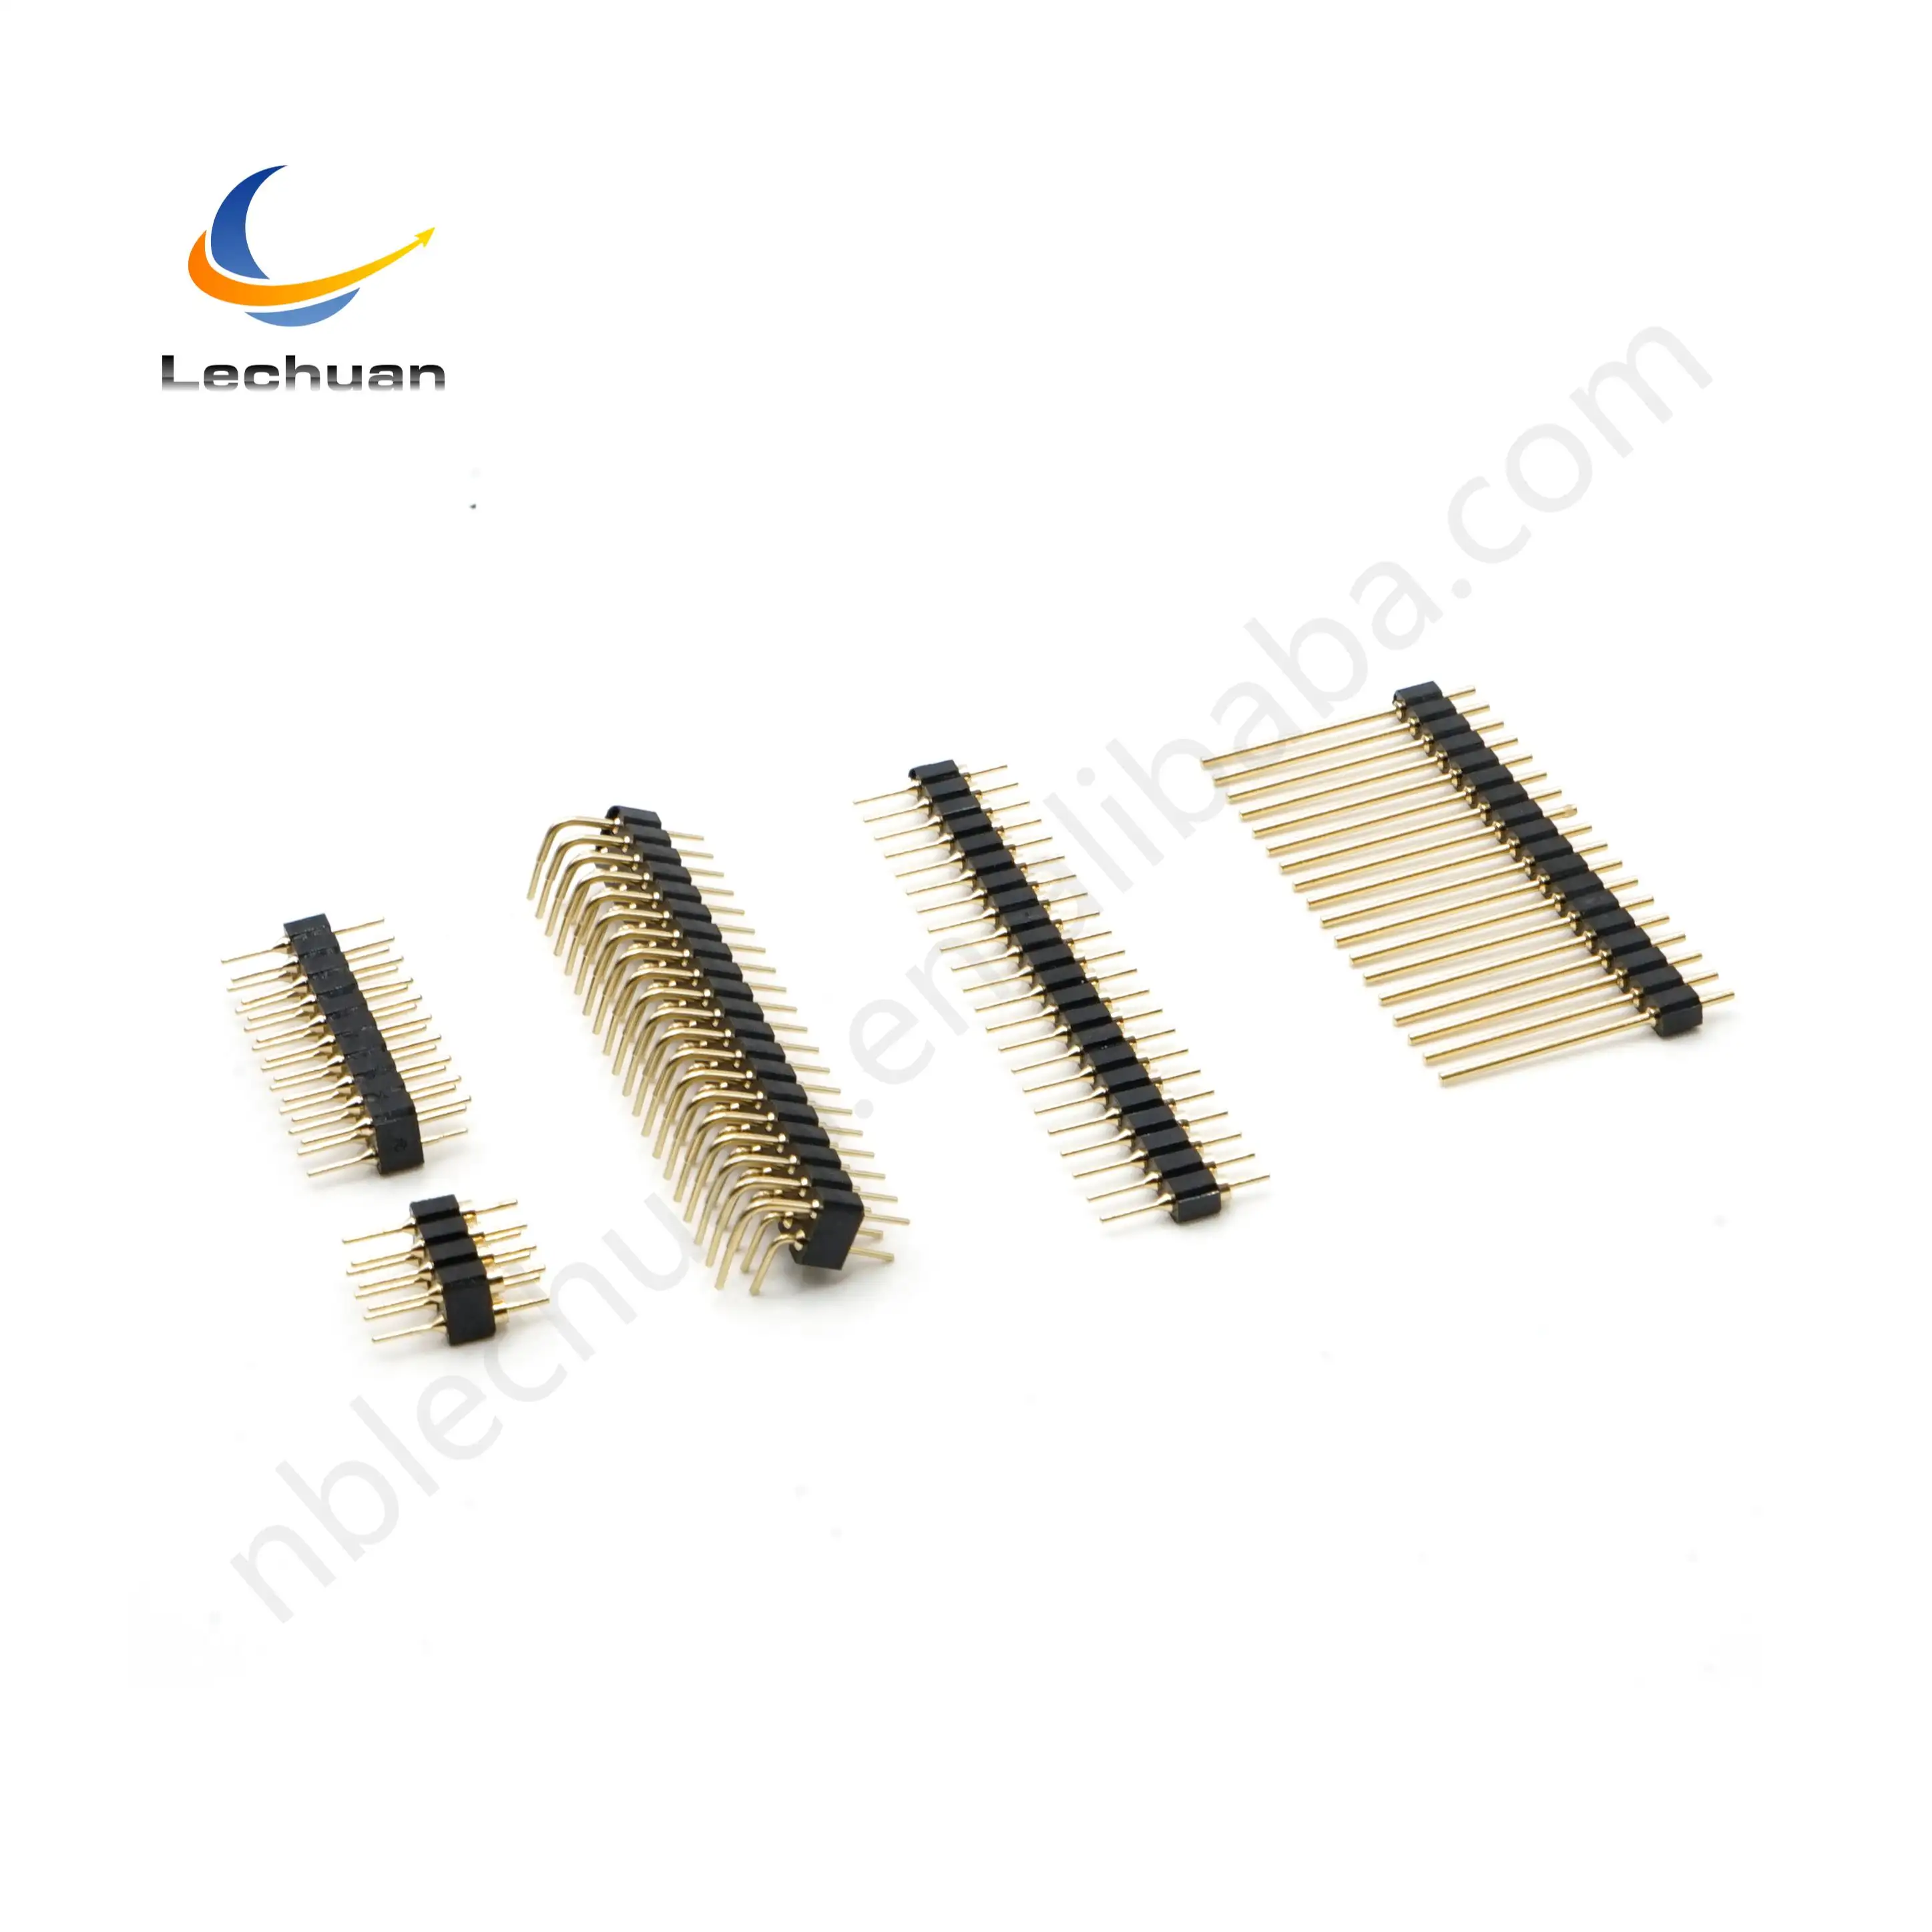 Machined pin header round pin dual row 2.54 1.27 2.0 2.54mm Pitch Straight Right angle SMT Pin length 12.76mm